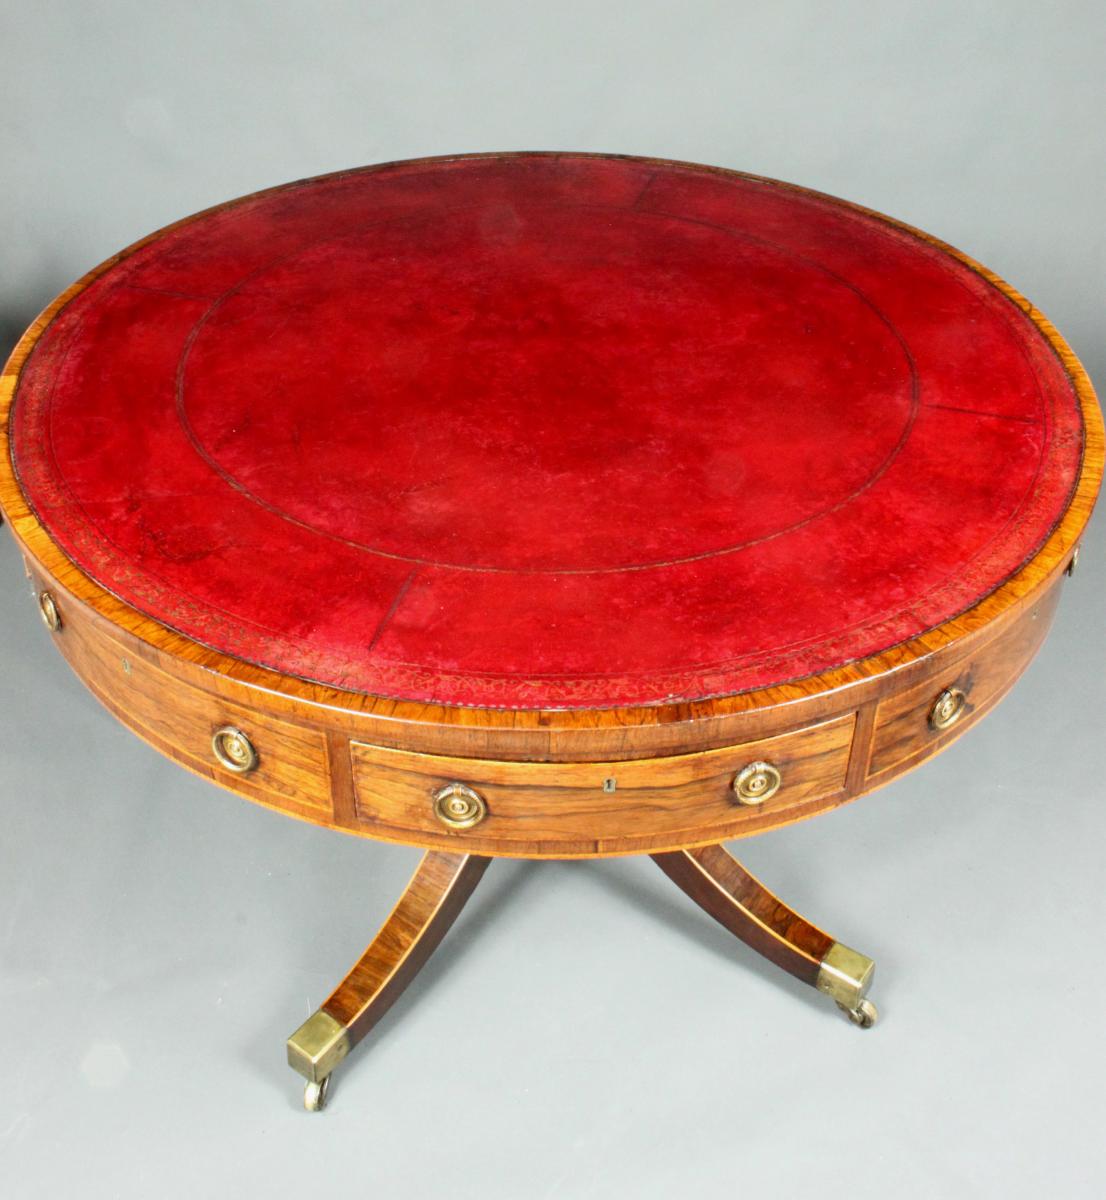 A fine Sheraton period rosewood drum table